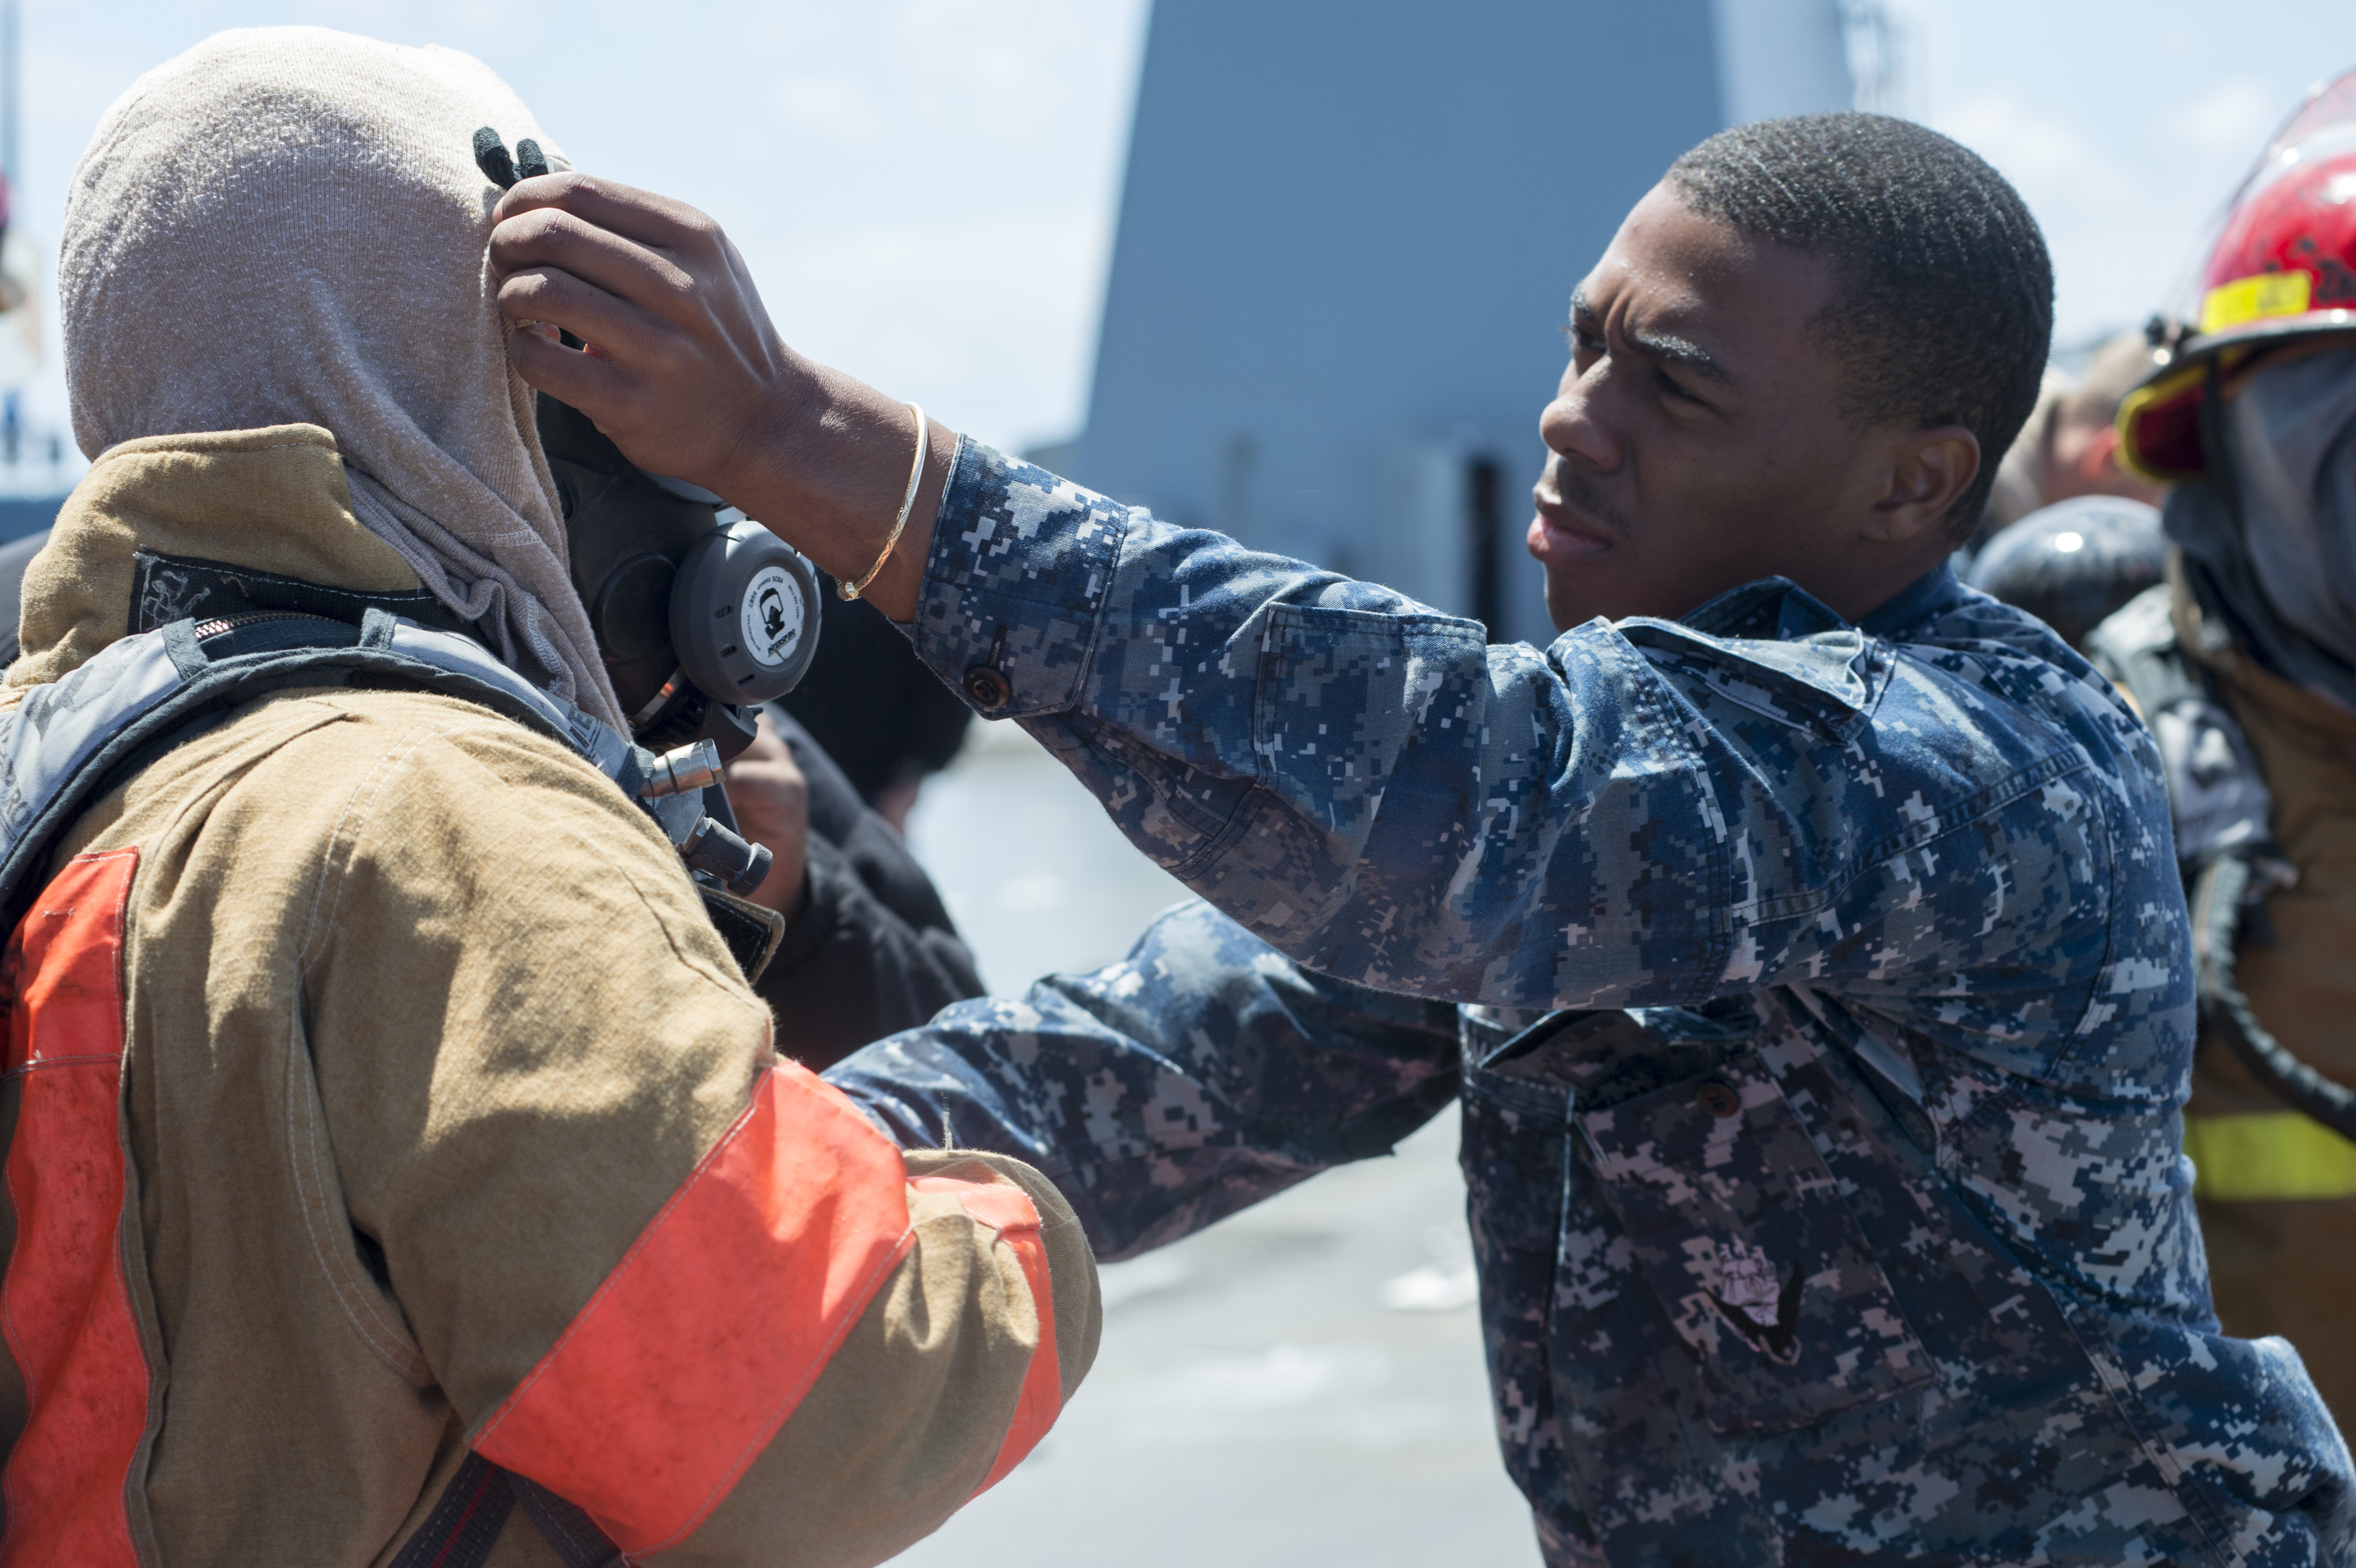 Baltic Sea Electronic Technician 3rd Class Sigui M. Howard-Magras, assigned to U.S. 6th Fleet command and control ship USS Mount Whitney (LCC20), helps out a sailor with putting on his face mask during a damage control exercise aboard the Mount Whitney. (photo by Mass Communication Specialist 3rd Class Luis R. Chavez Jr./released)